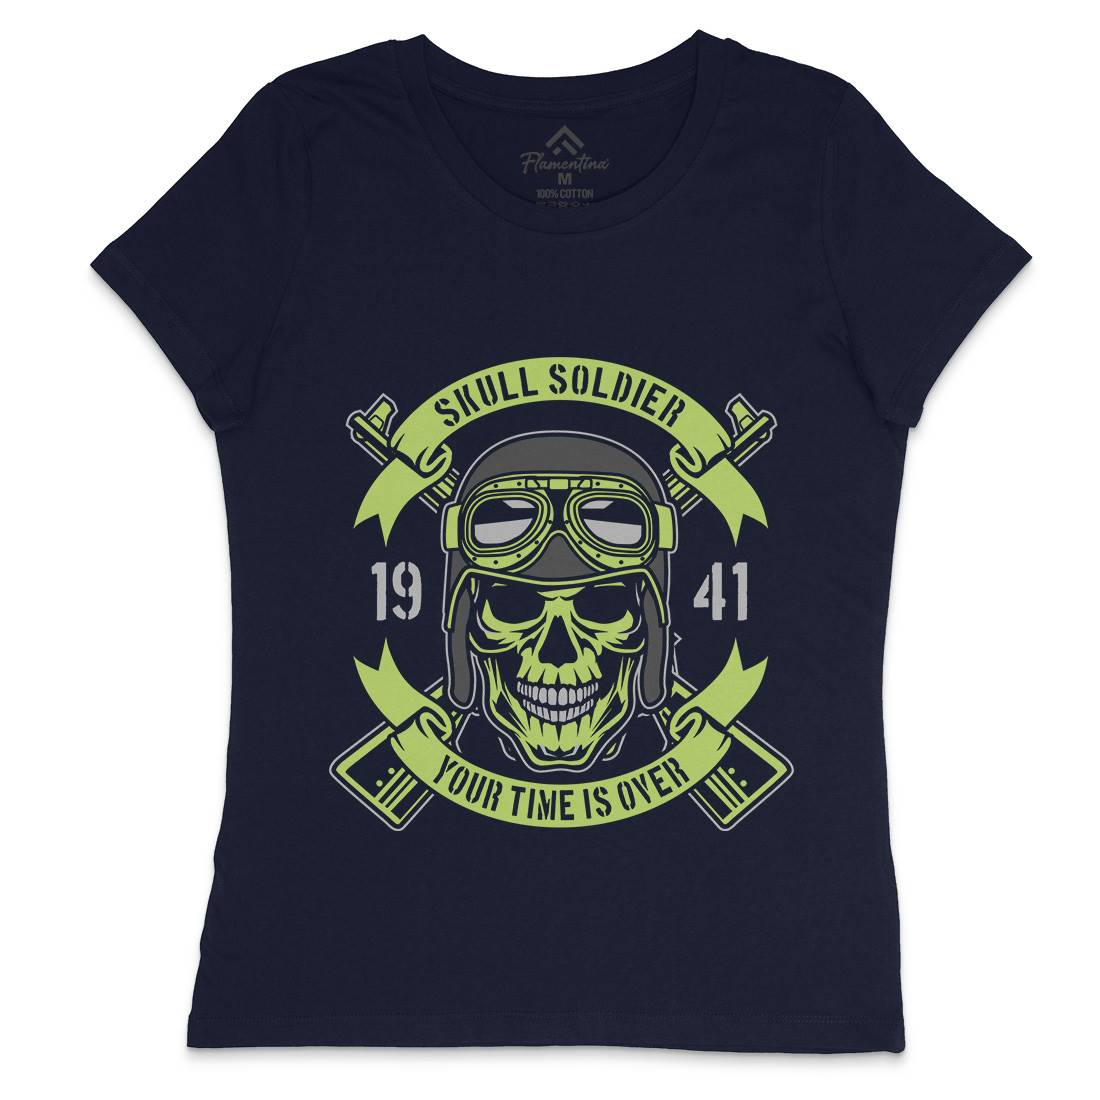 Skull Soldier Womens Crew Neck T-Shirt Army D579